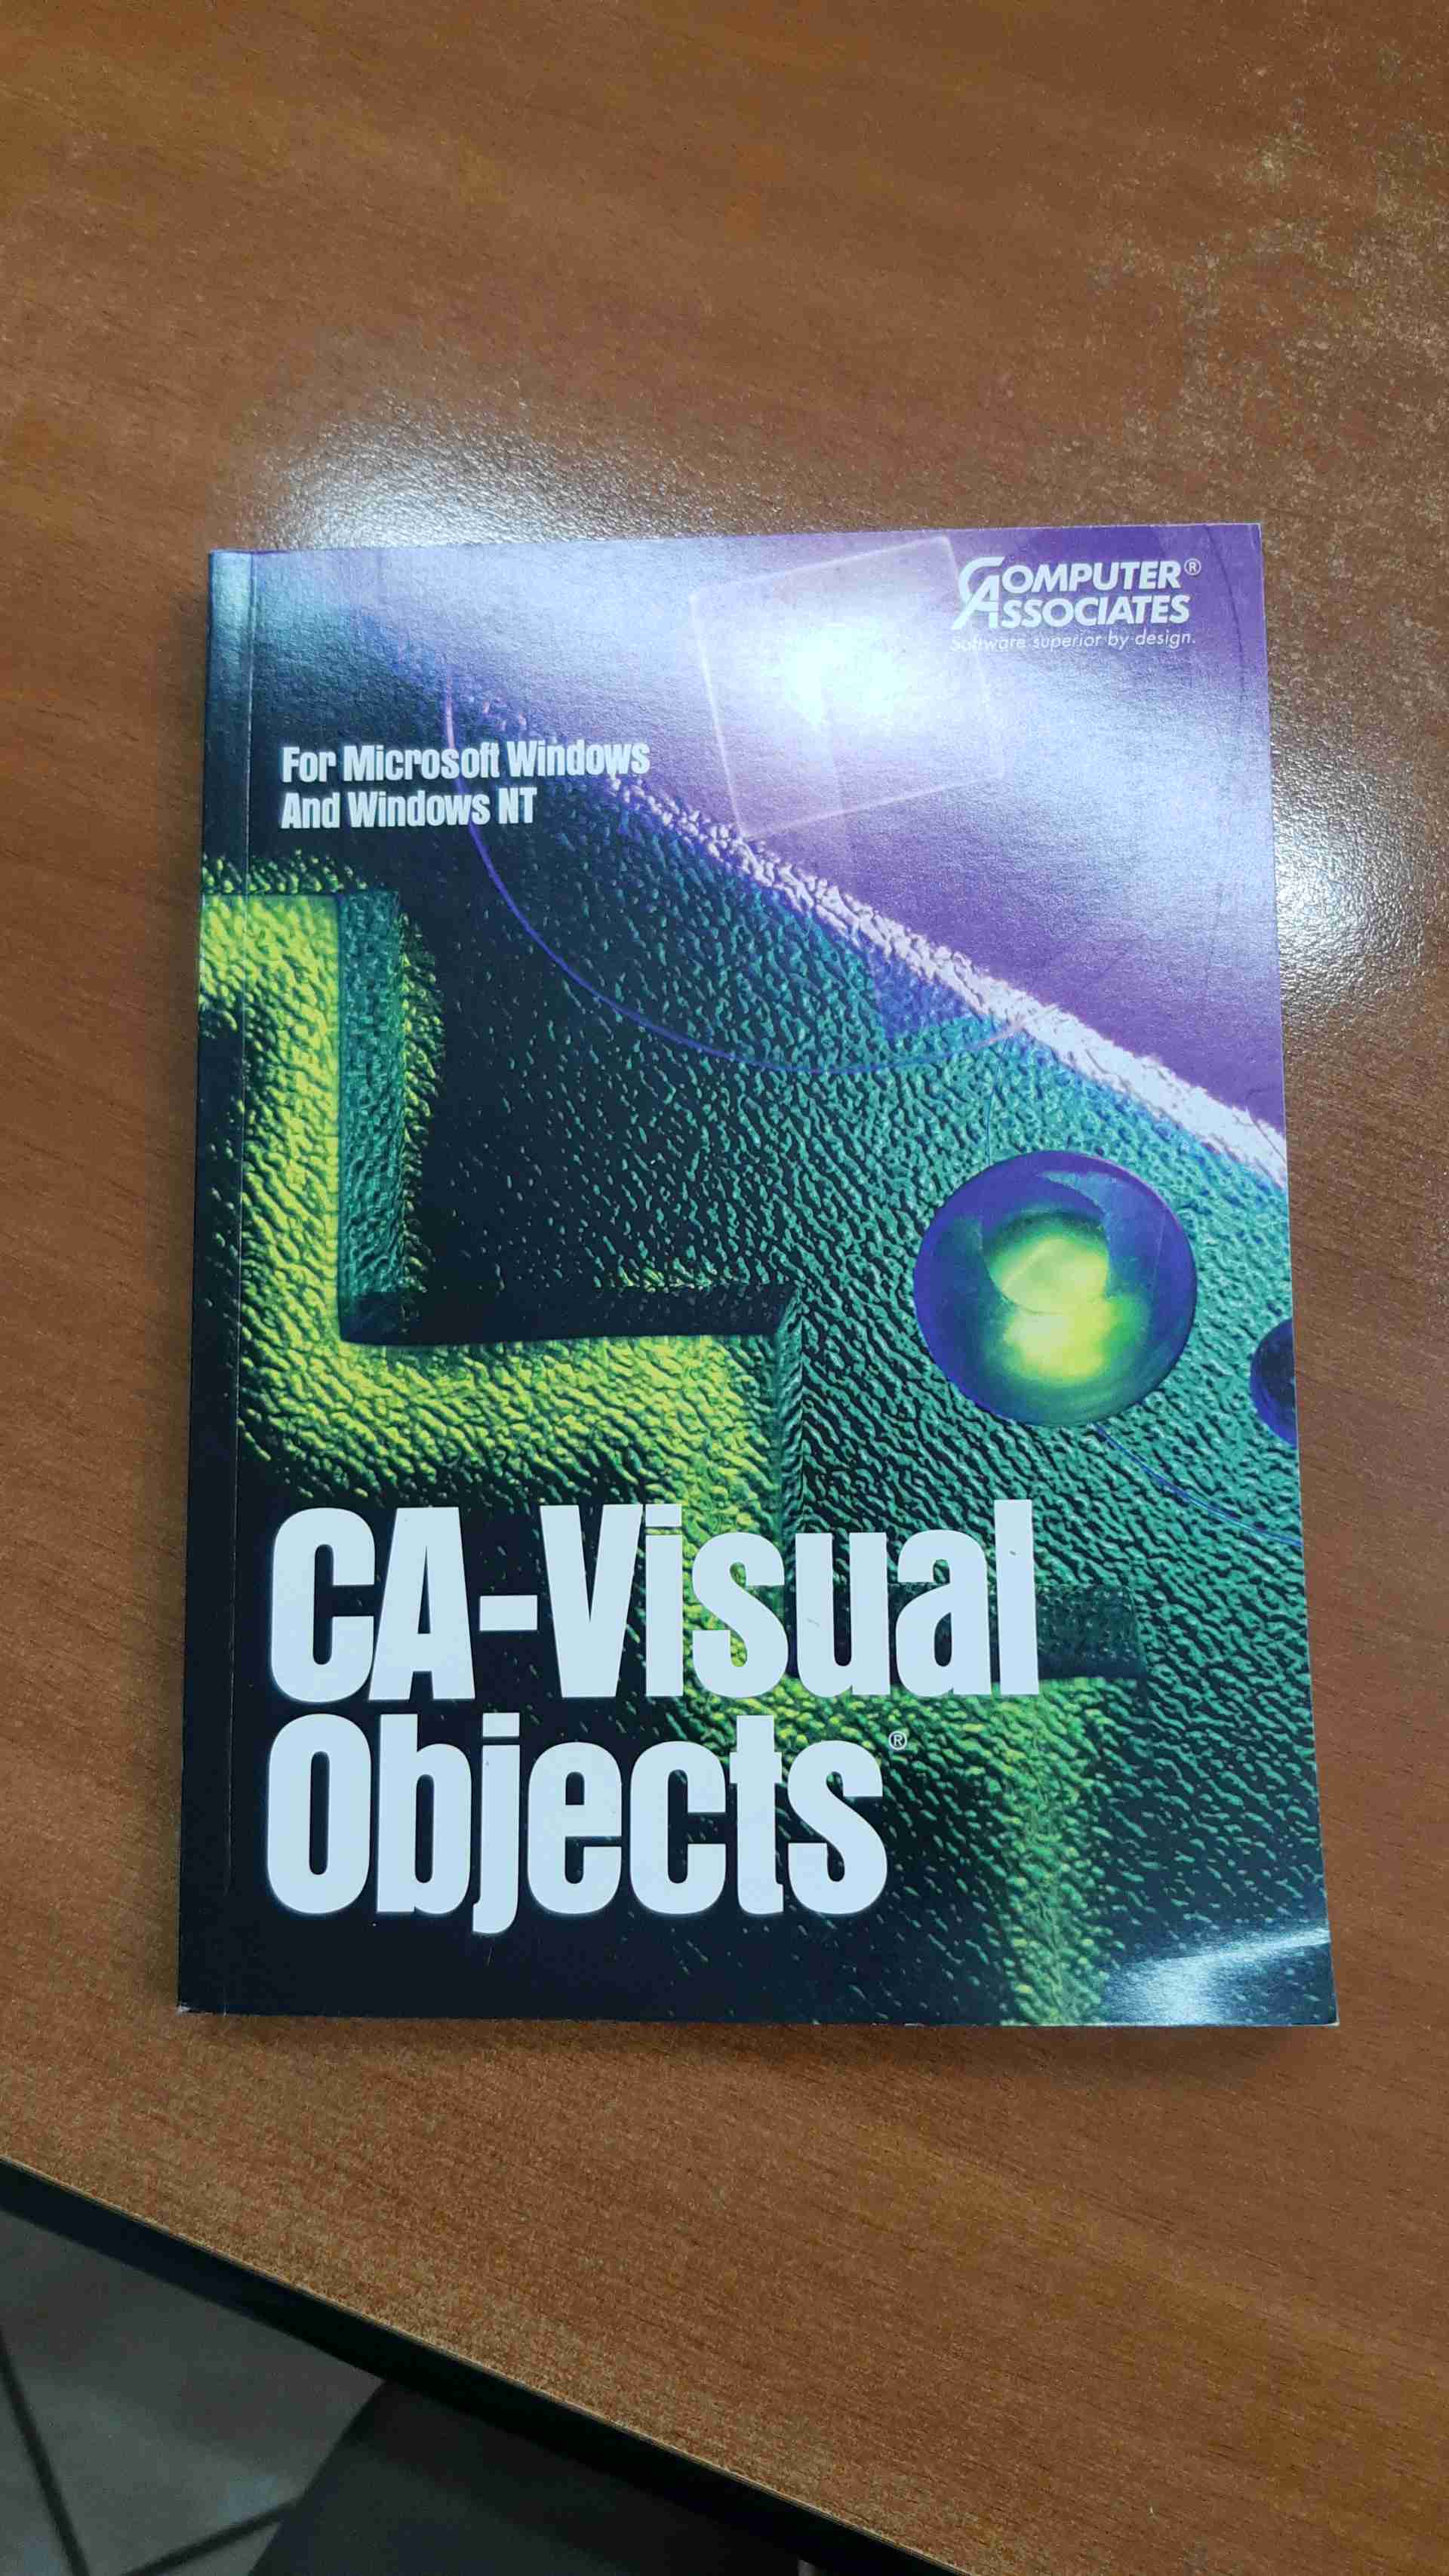 CA-Visual Objects